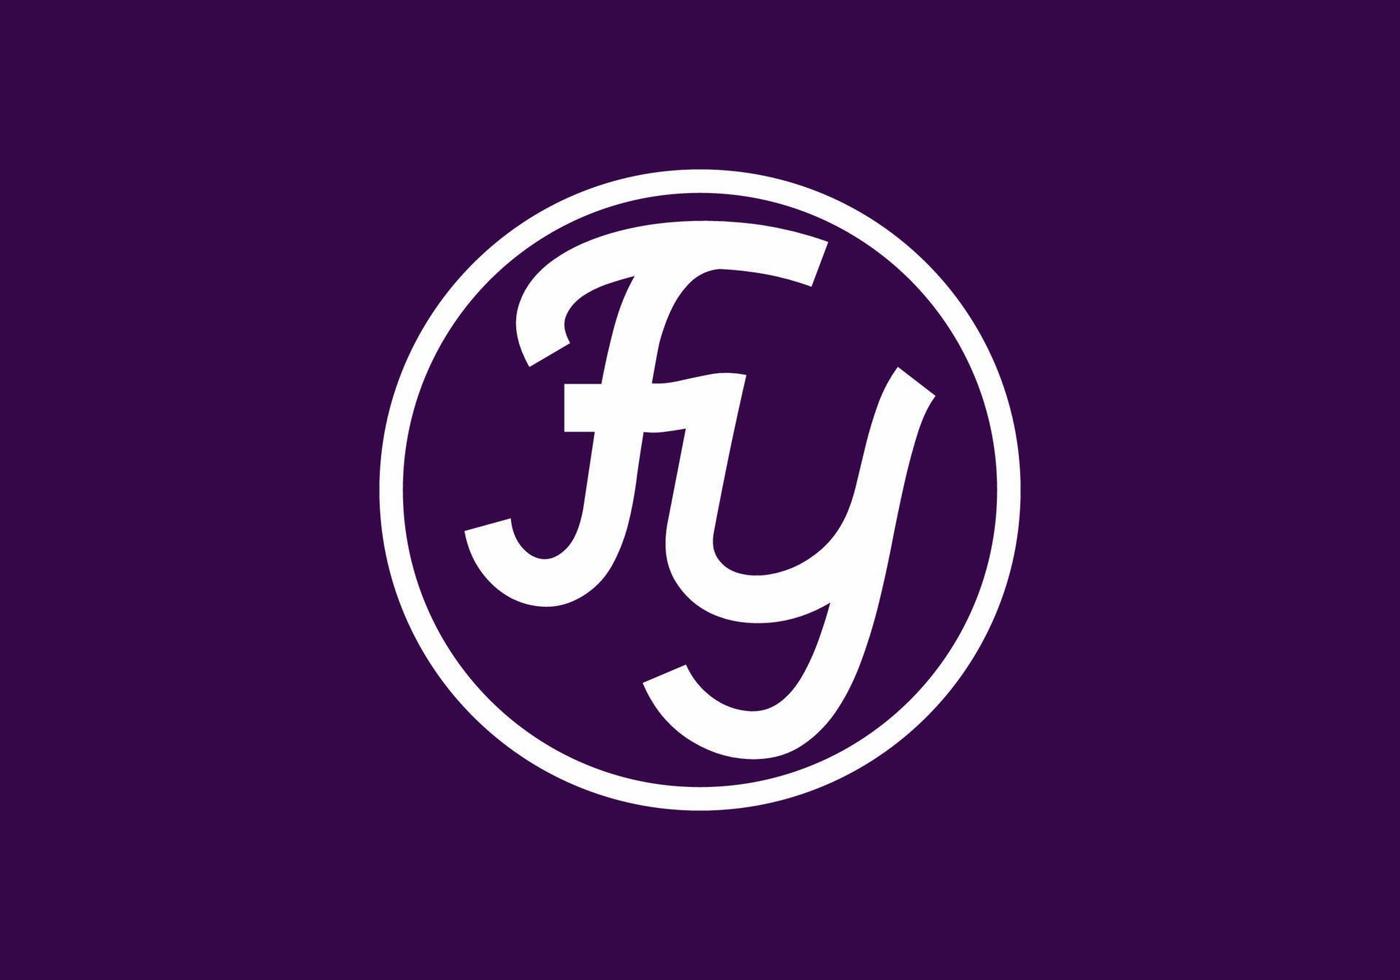 Purple FY initial letter in circle logo vector